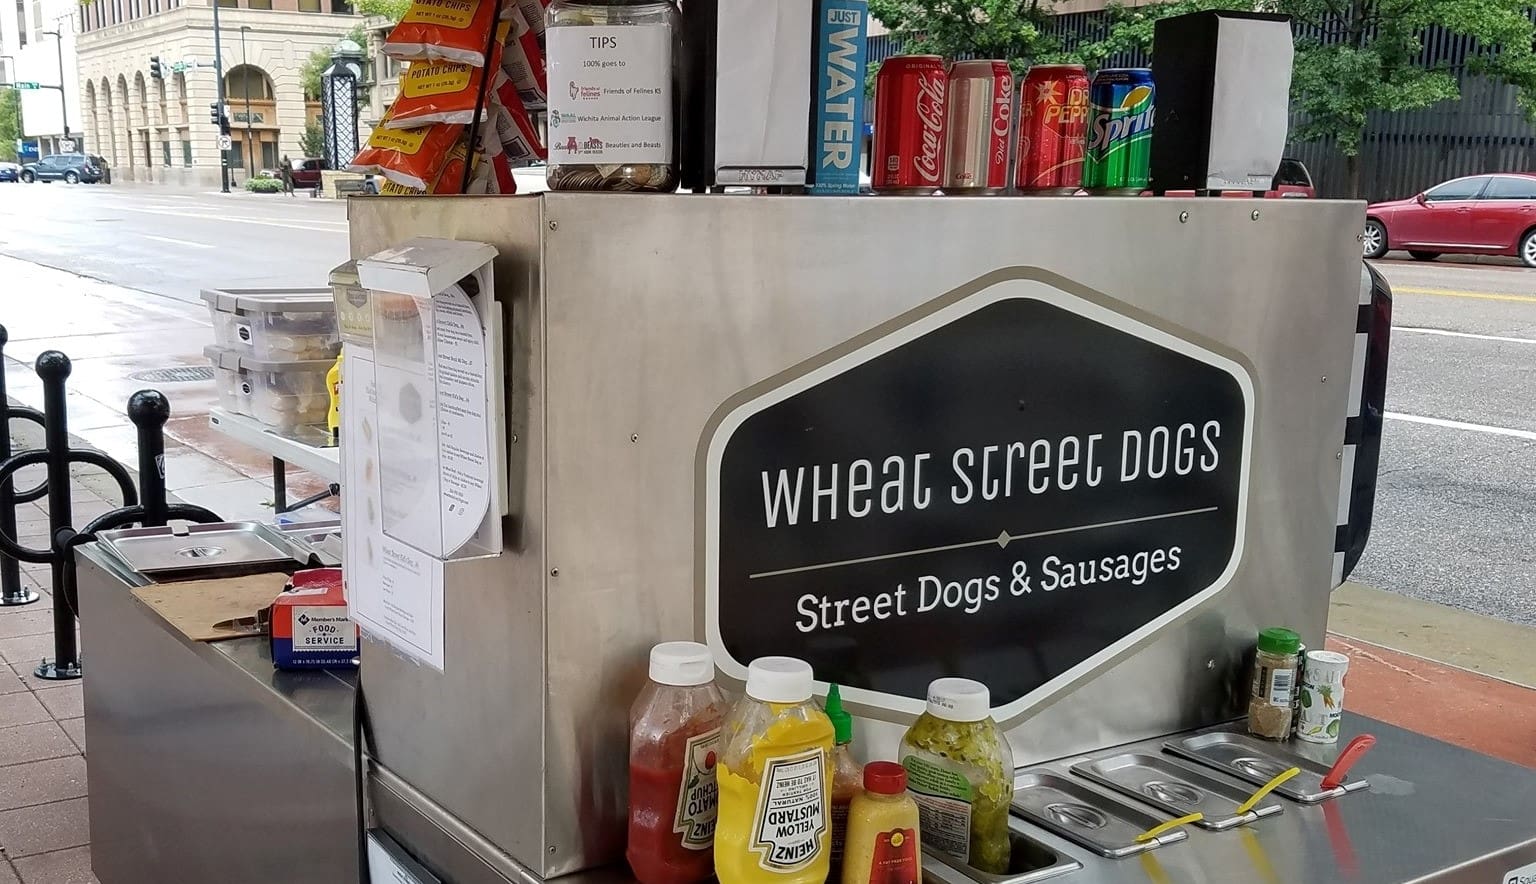 Stop by the plaza for Wheat Street Dogs food truck from 11 a.m. to 1 p.m. at the plaza today.